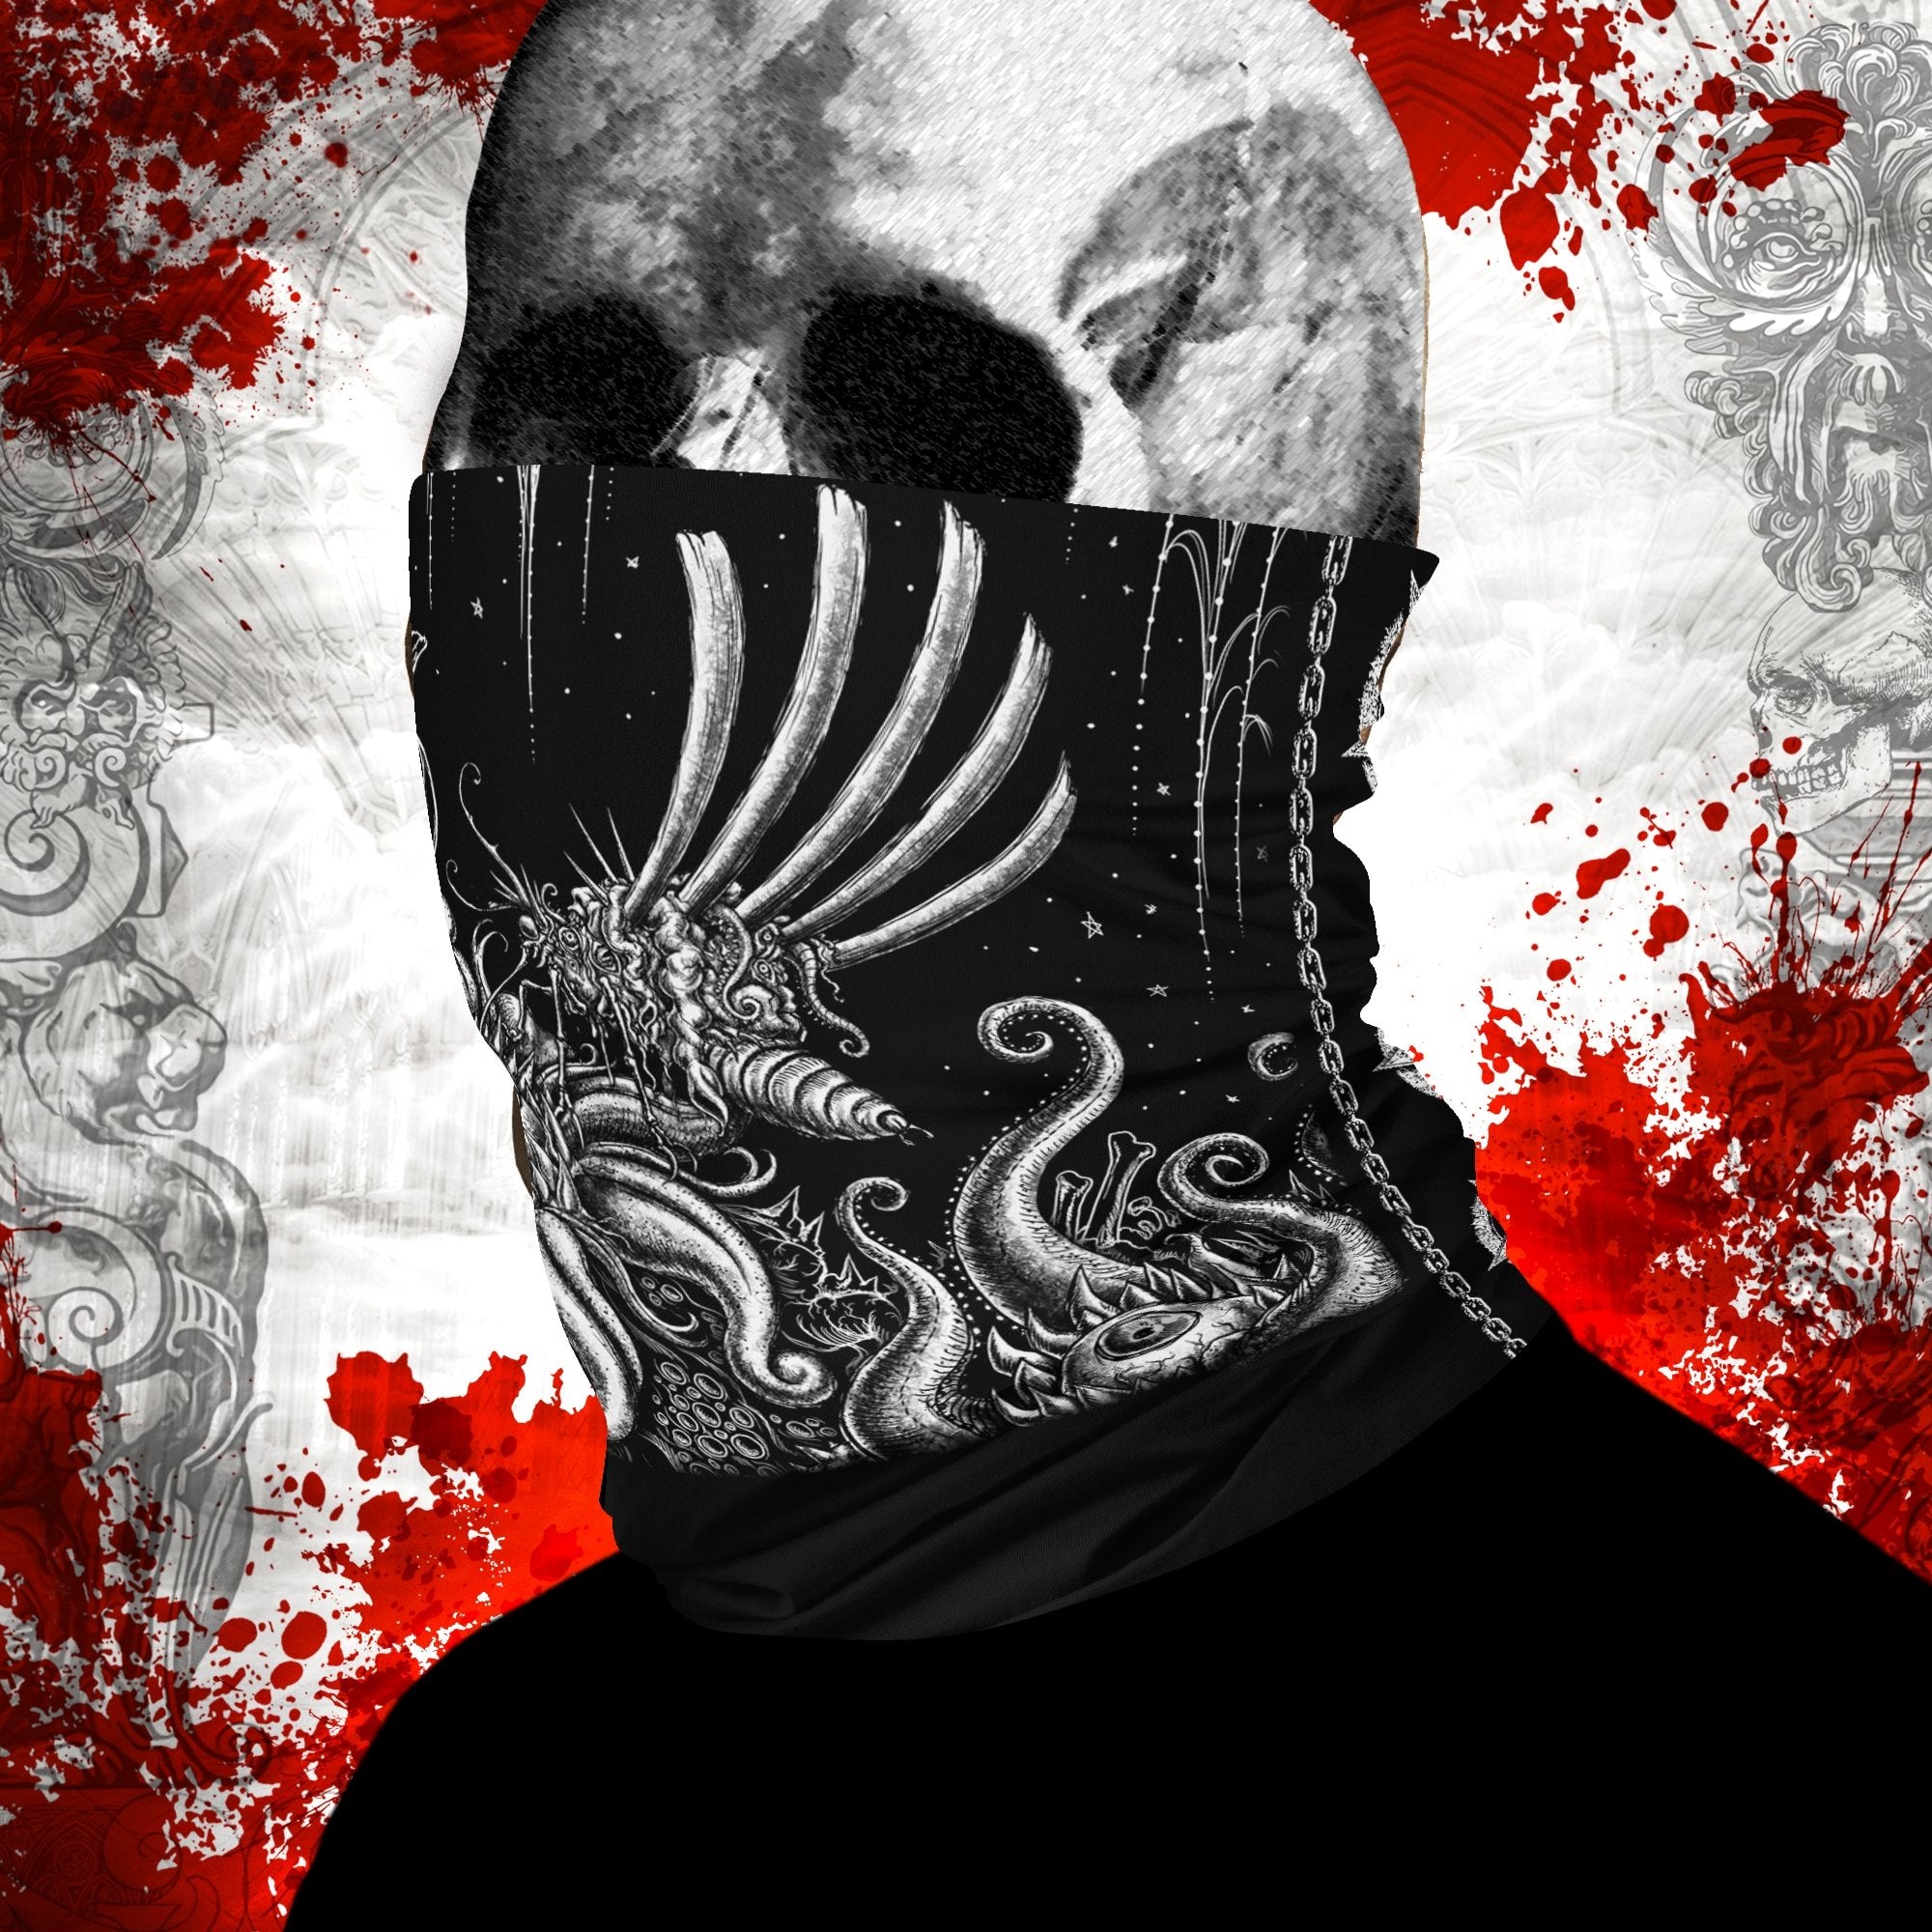 Horror Neck Gaiter, Face Mask, Head Covering, Gothic Hell, Street Outfit - Bloodfly - Abysm Internal